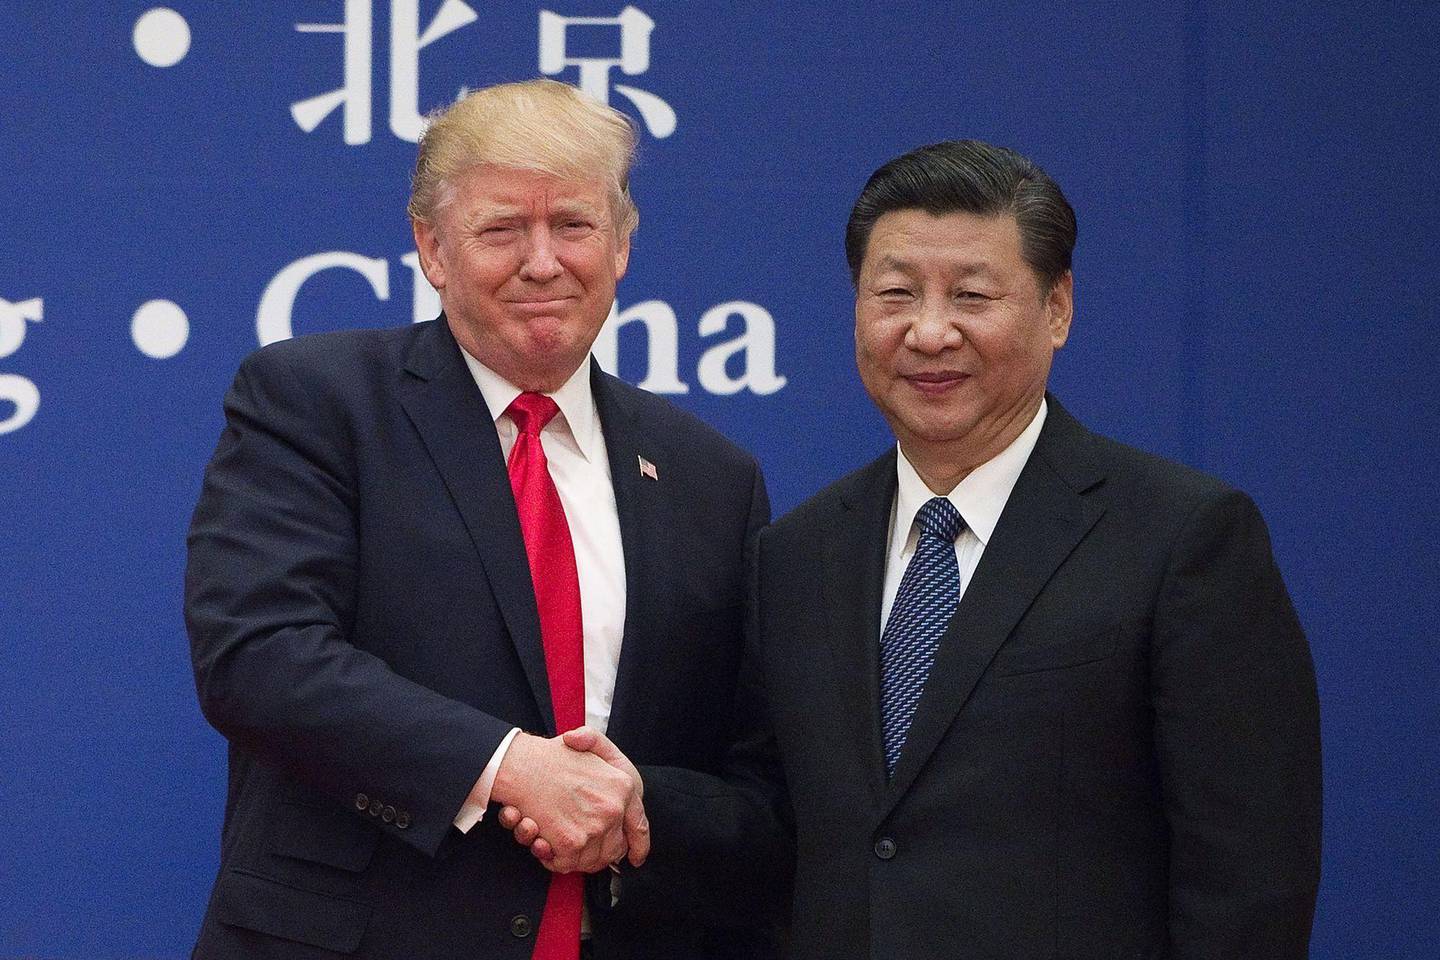 (FILES) This file photo taken on November 9, 2017 shows US President Donald Trump (L) and China's President Xi Jinping shaking hands during a business leaders event at the Great Hall of the People in Beijing. - Donald Trump's first term in office has been rough on China, with war over trade and tech amplified by daily mudslinging, yet Beijing may welcome his re-election as it scans the horizon for the decline of its superpower rival. (Photo by Nicolas ASFOURI / AFP) / TO GO WITH US-vote-diplomacy-trade-China,FOCUS by Patrick Baert